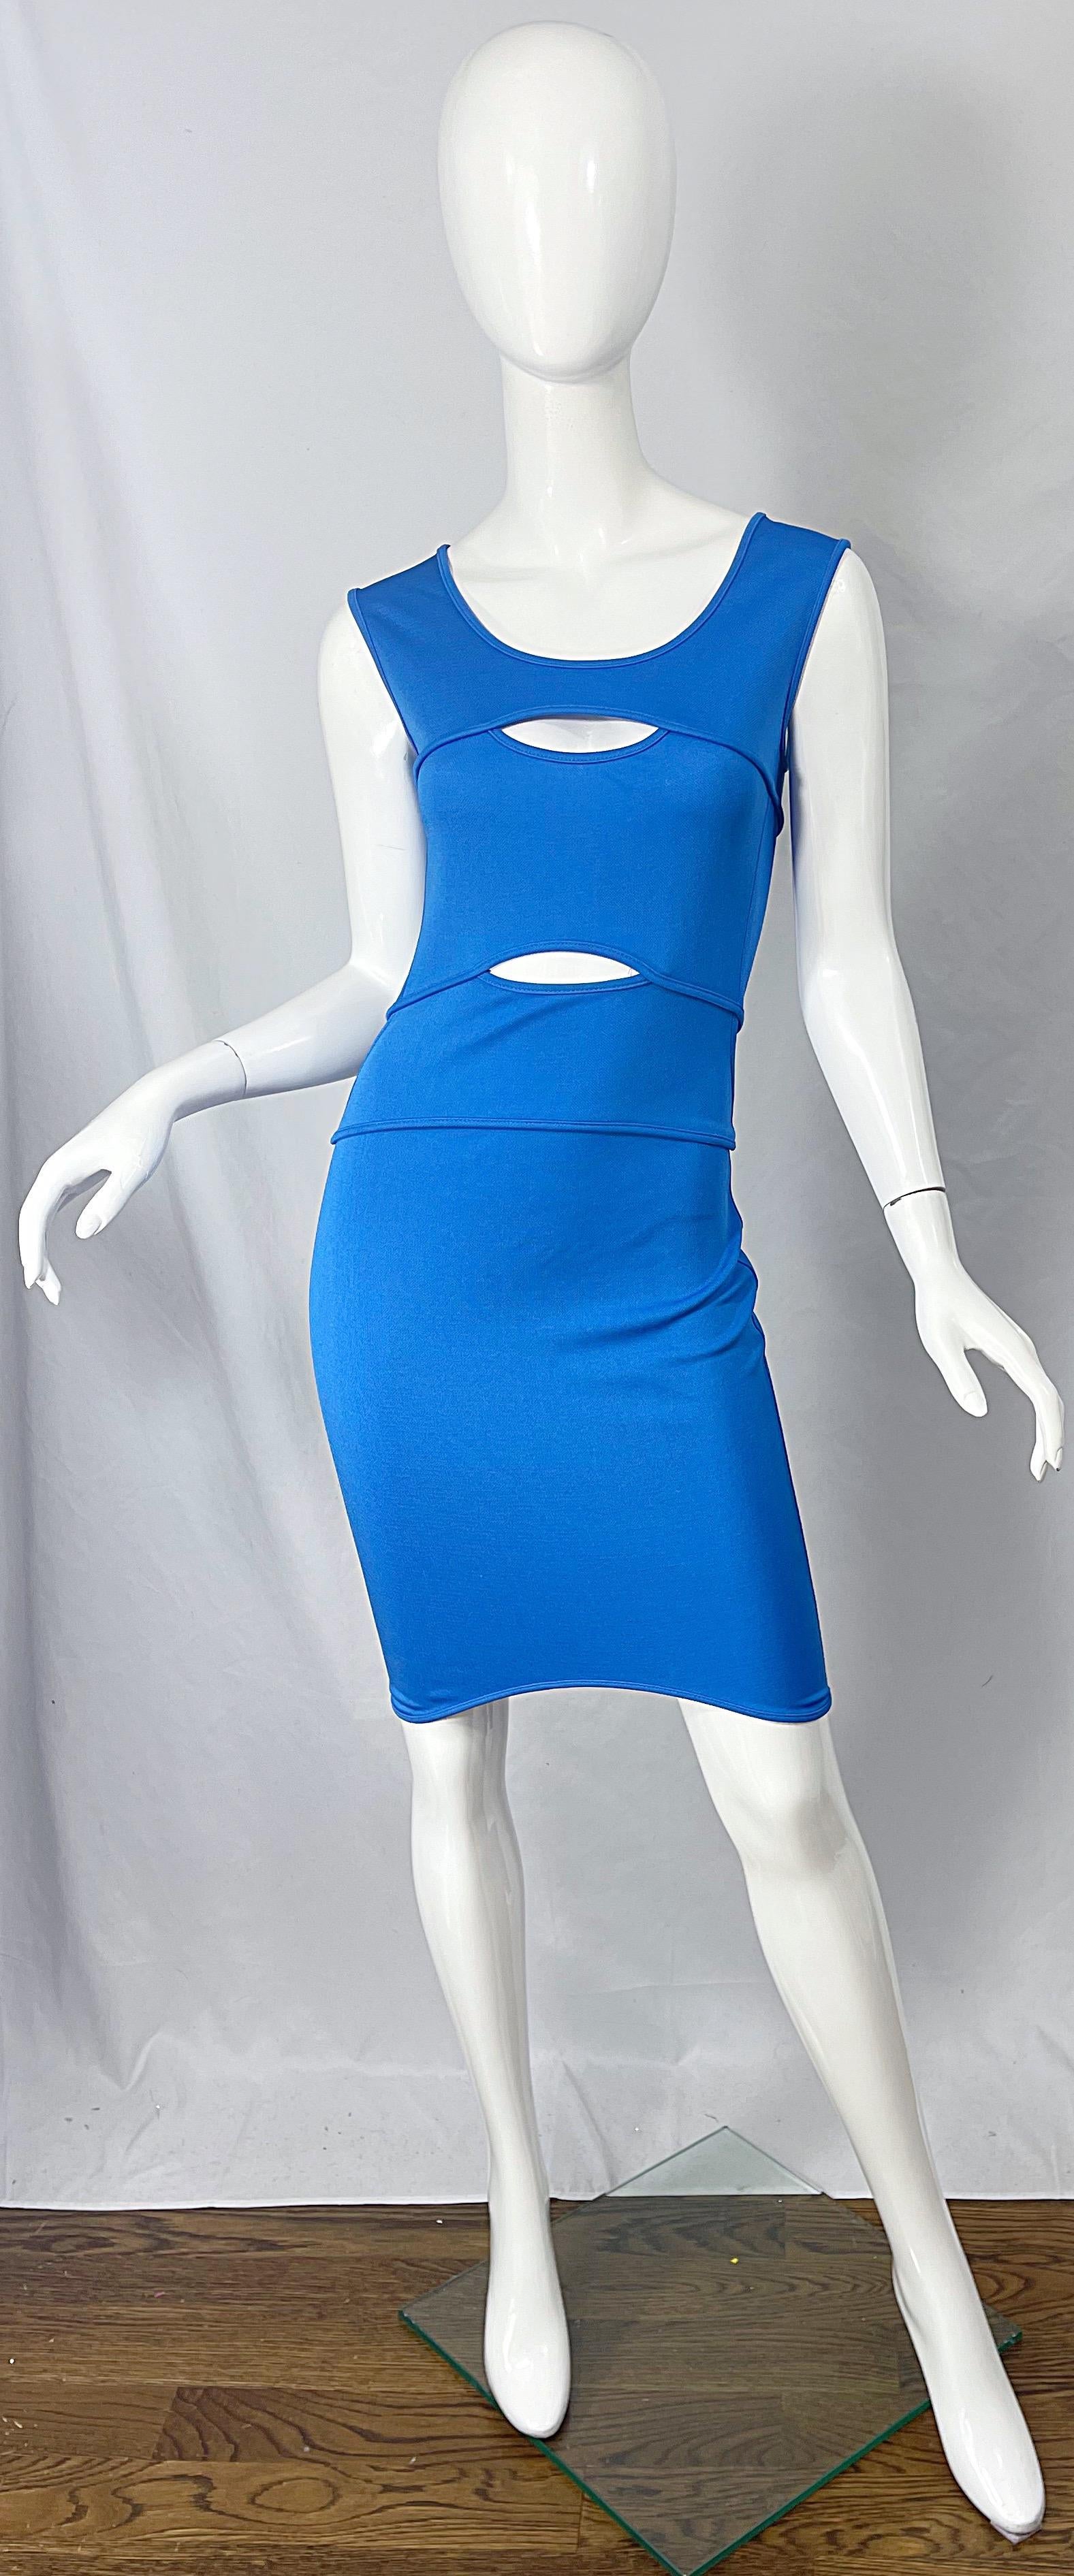 Sexy early 90s THIERRY MUGLER blue cut-out bod con dress ! Features a form fitting stretch rayon fabric with cut-out above the bust and under. Hidden zipper up the back with hook-and-eye closure. The perfect alternative to a little black dress. This